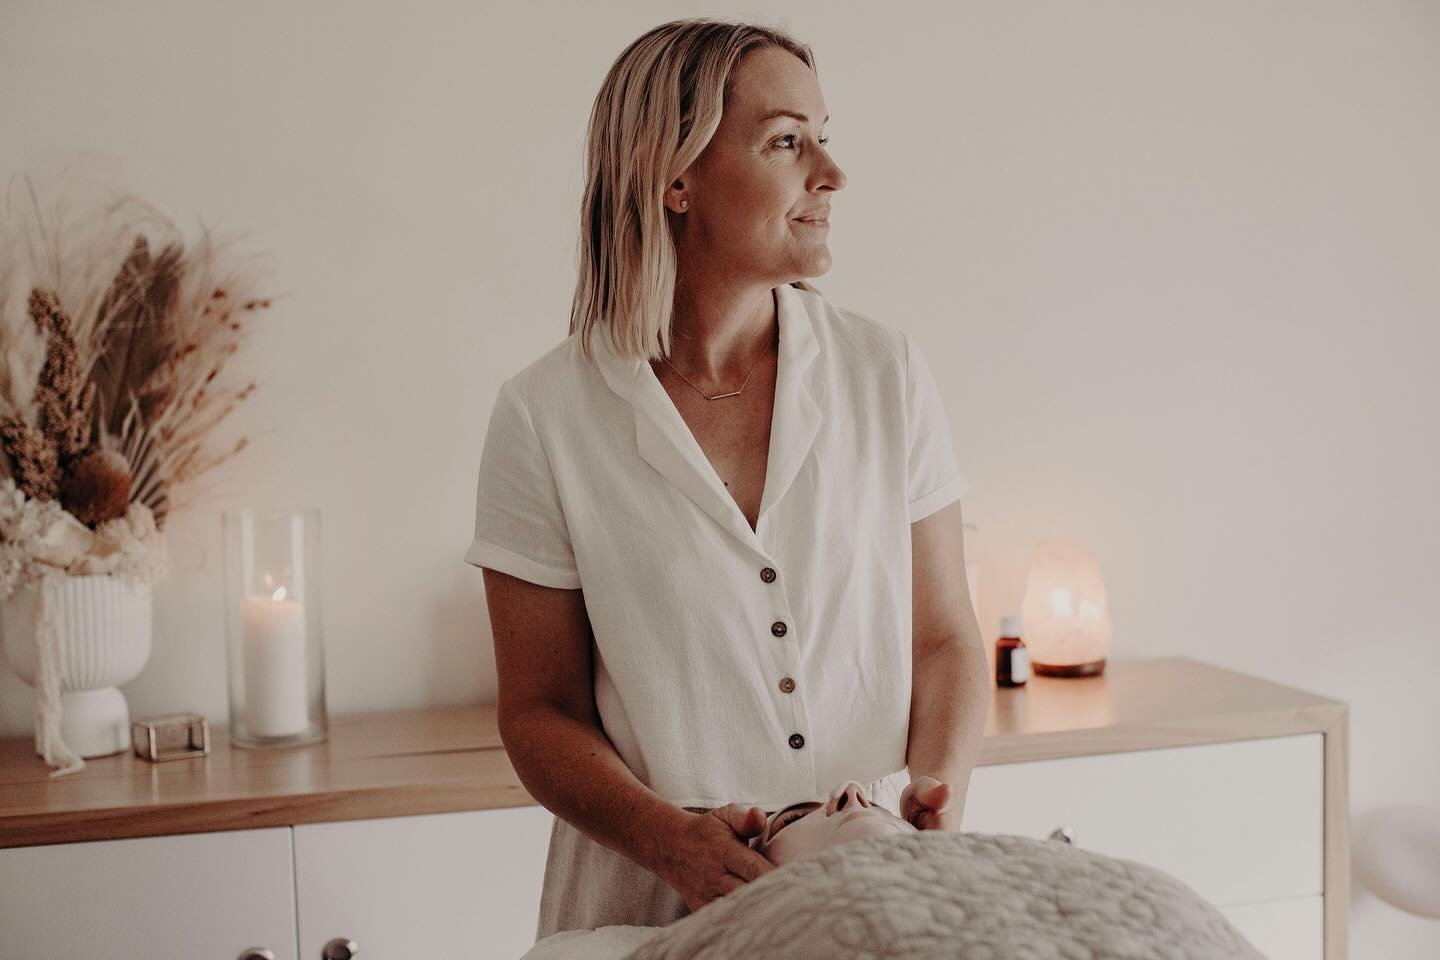 REIKI FACIALS // A great way to introduce yourself to Reiki and see what it&rsquo;s all about.
 
A Reiki Facial is very similar to our signature Skin Treatments, it just also incorporates Reiki for 15-20mins while you have a face mask on. It&rsquo;s 